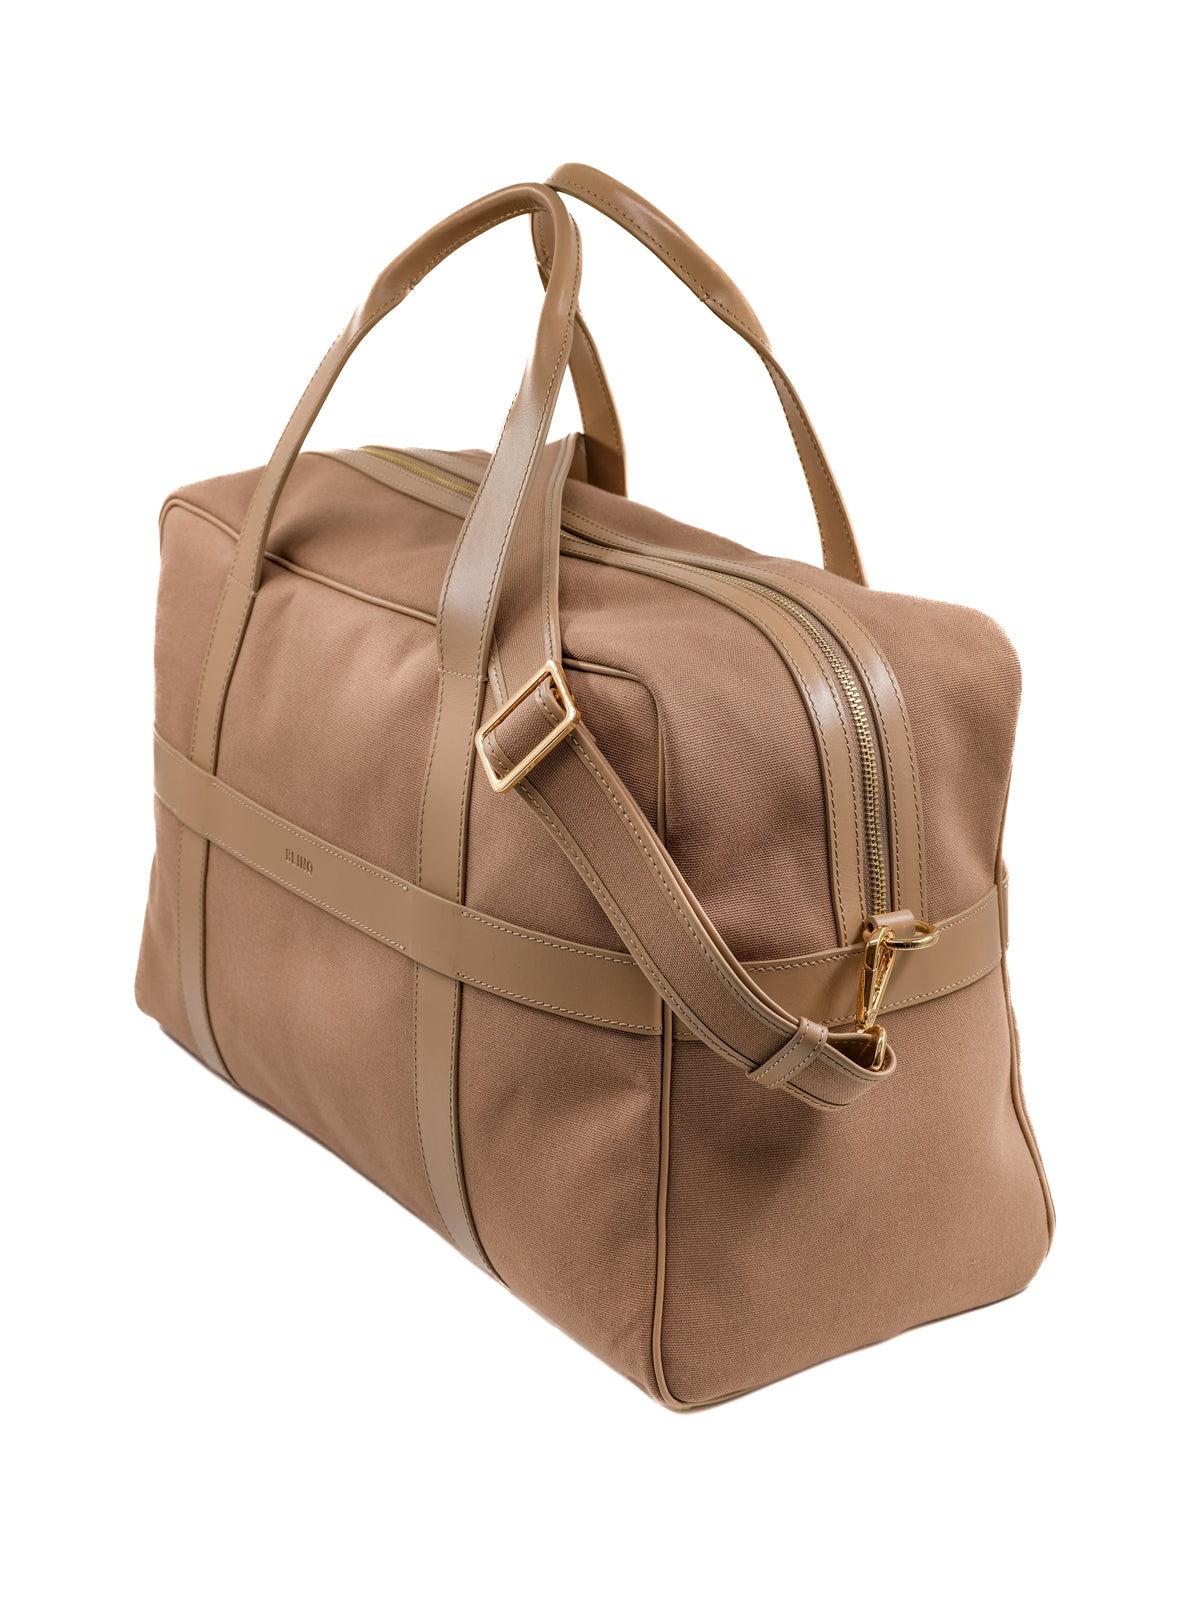 THE WEEKENDER Warm Taupe